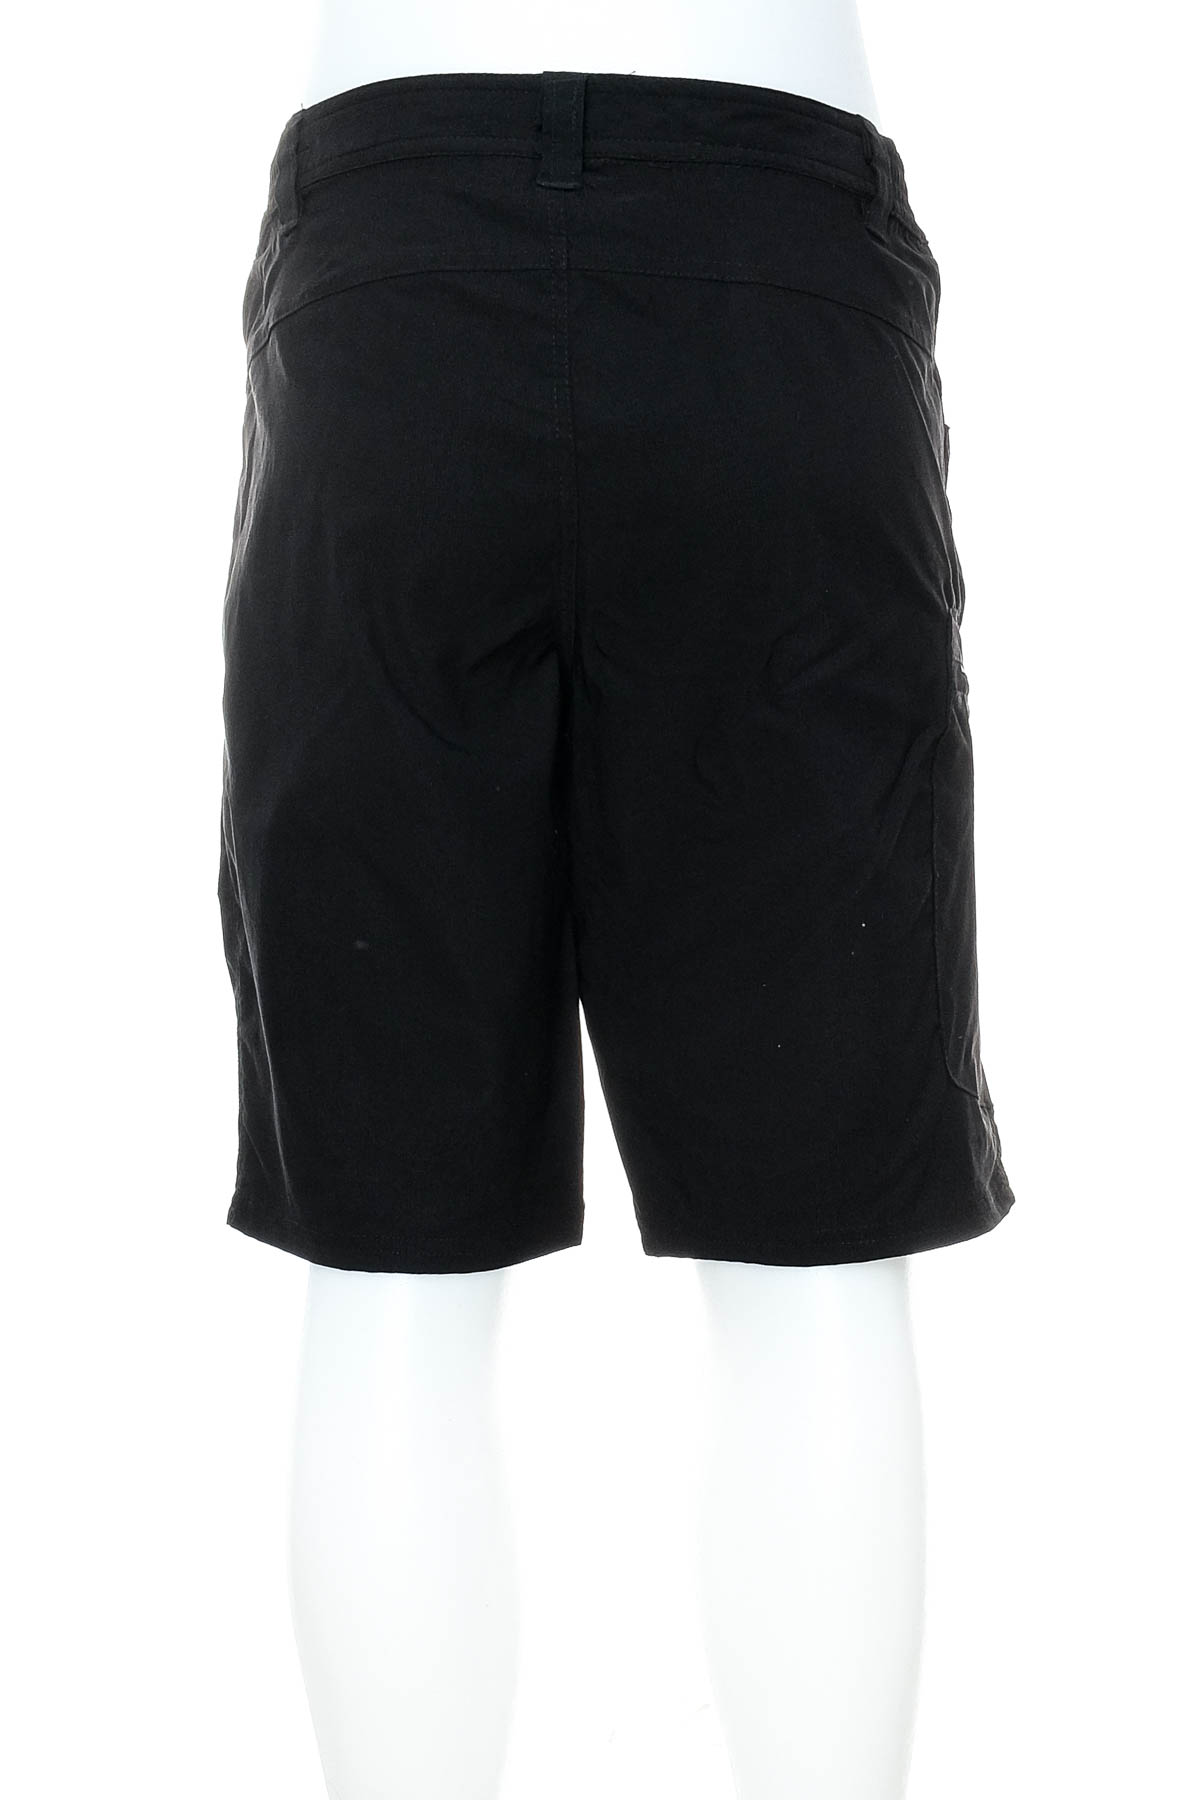 Men's shorts for cycling - Crivit - 1